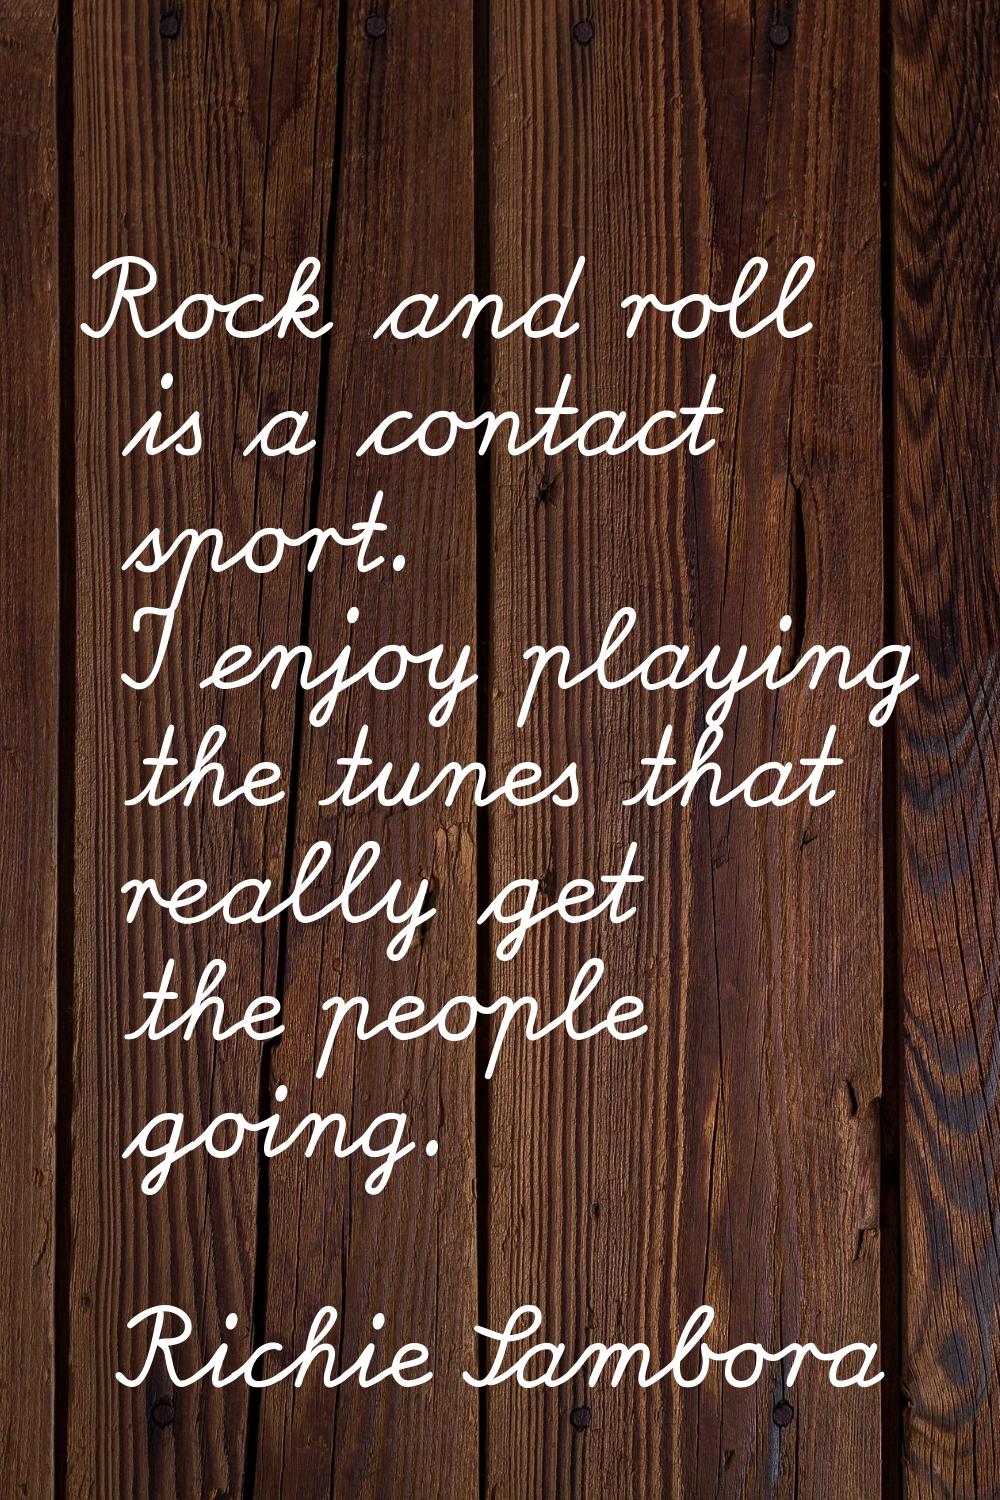 Rock and roll is a contact sport. I enjoy playing the tunes that really get the people going.